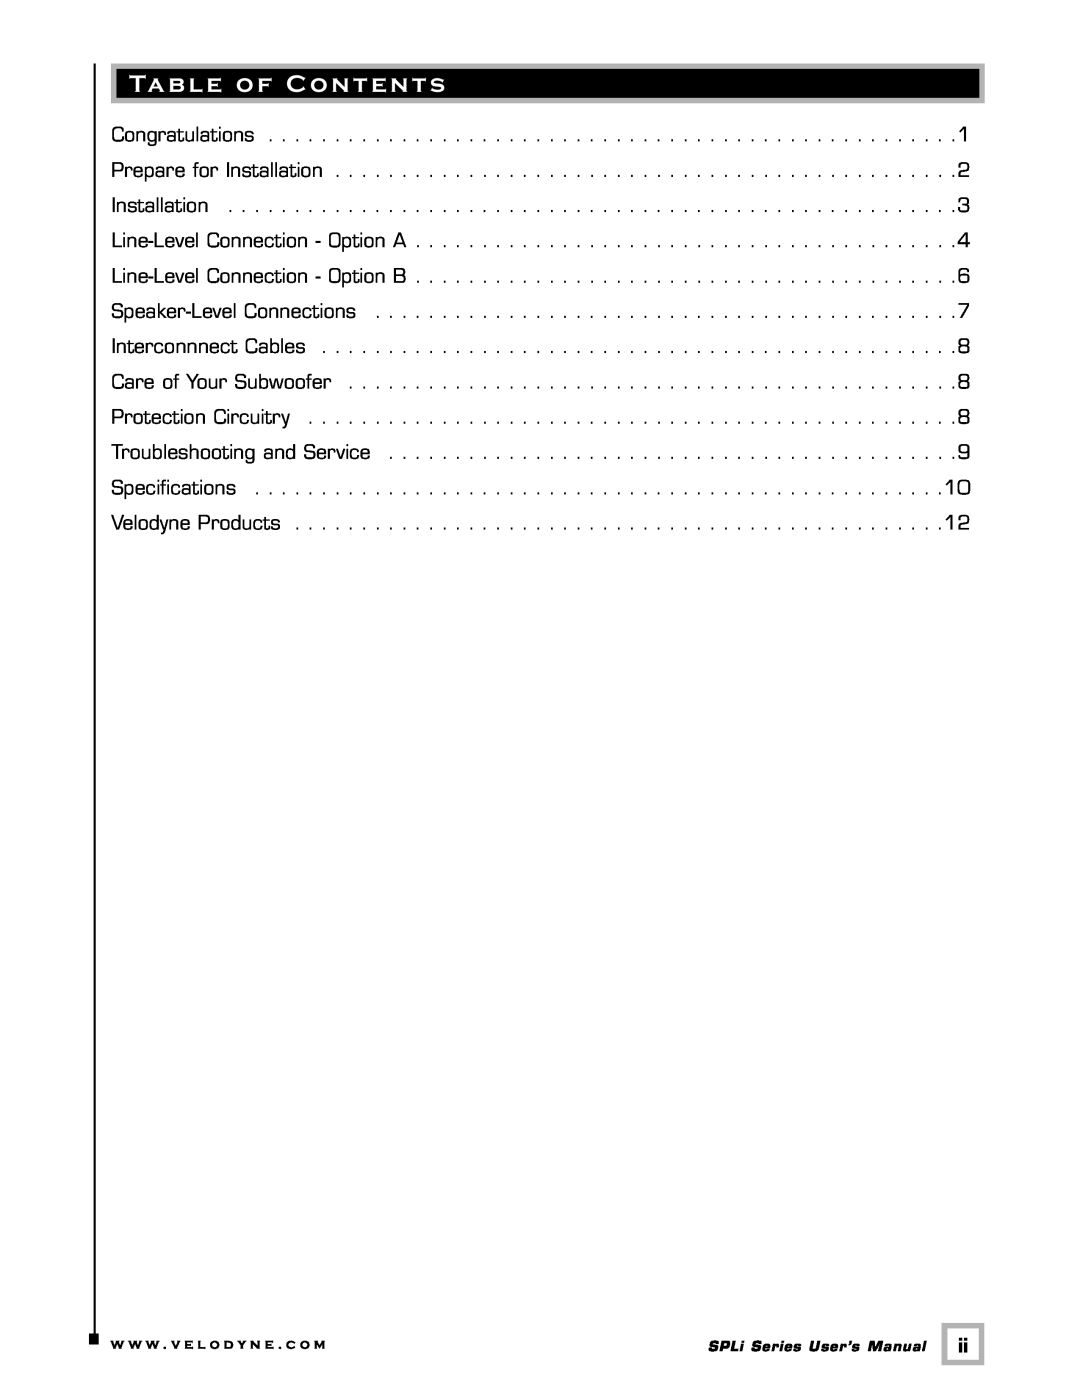 Velodyne Acoustics SPL-1000I user manual Table of Contents 